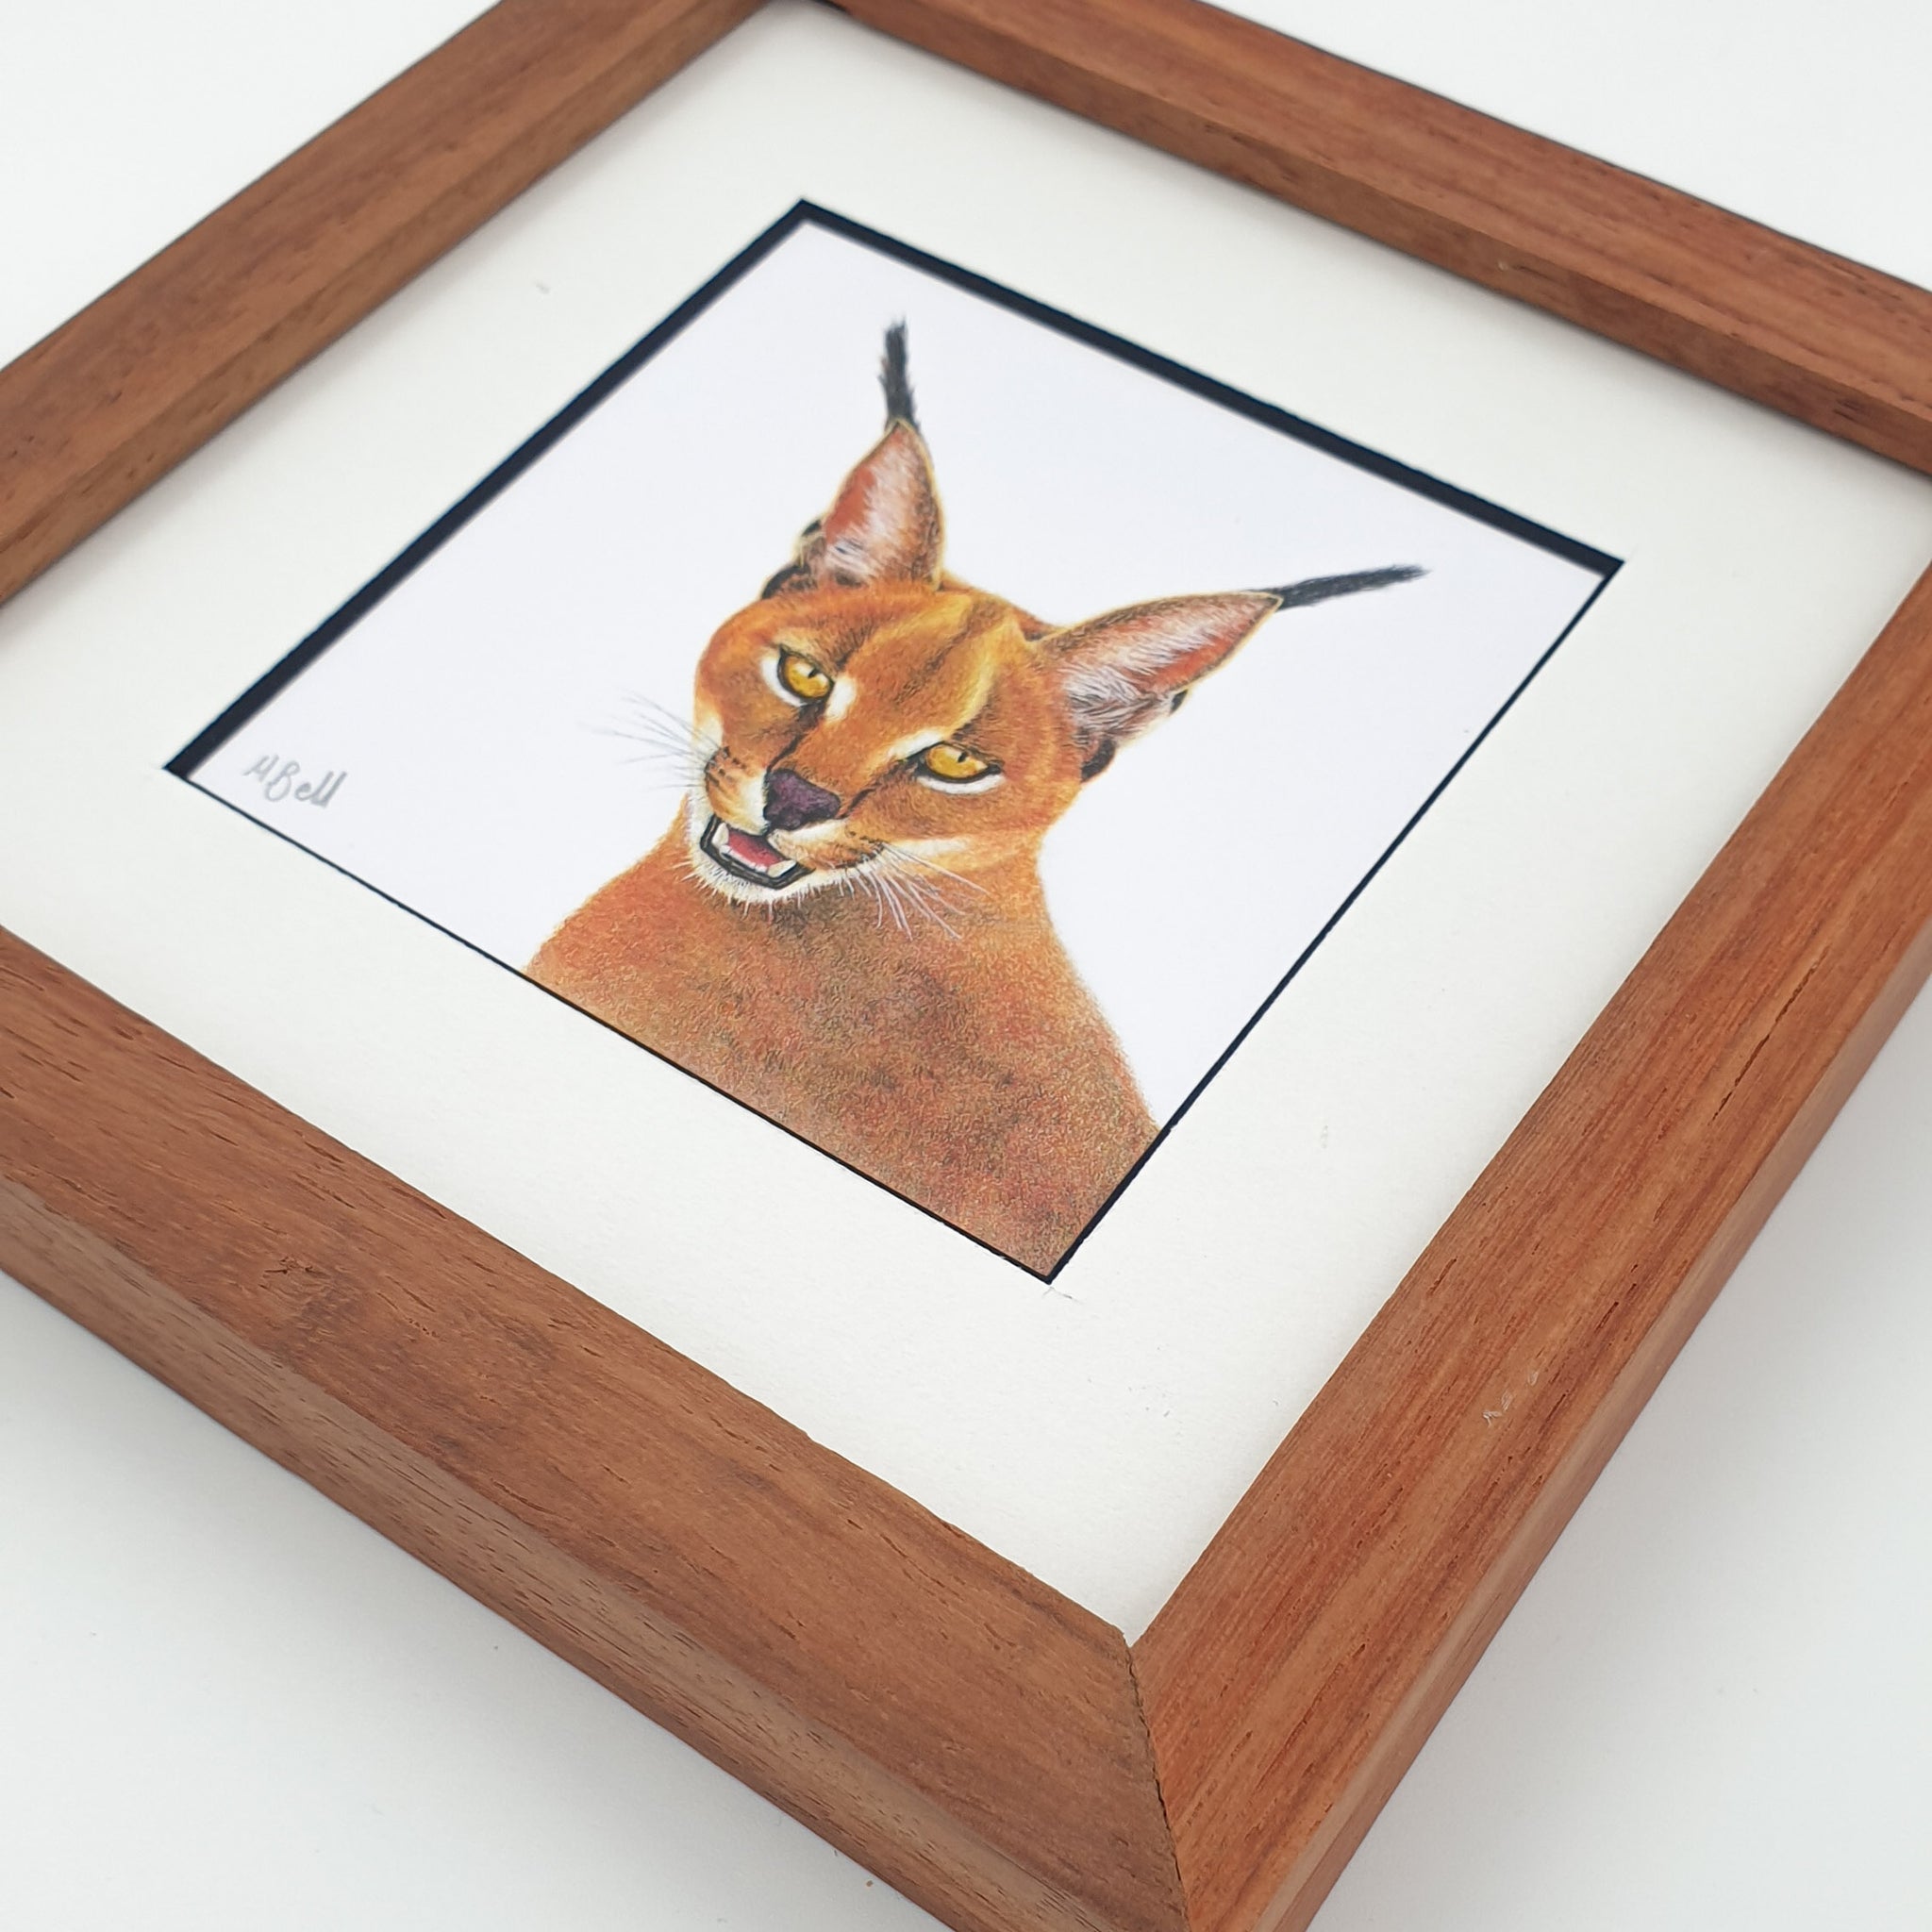 Caracal wildlife drawing with a wooden Kiaat frame